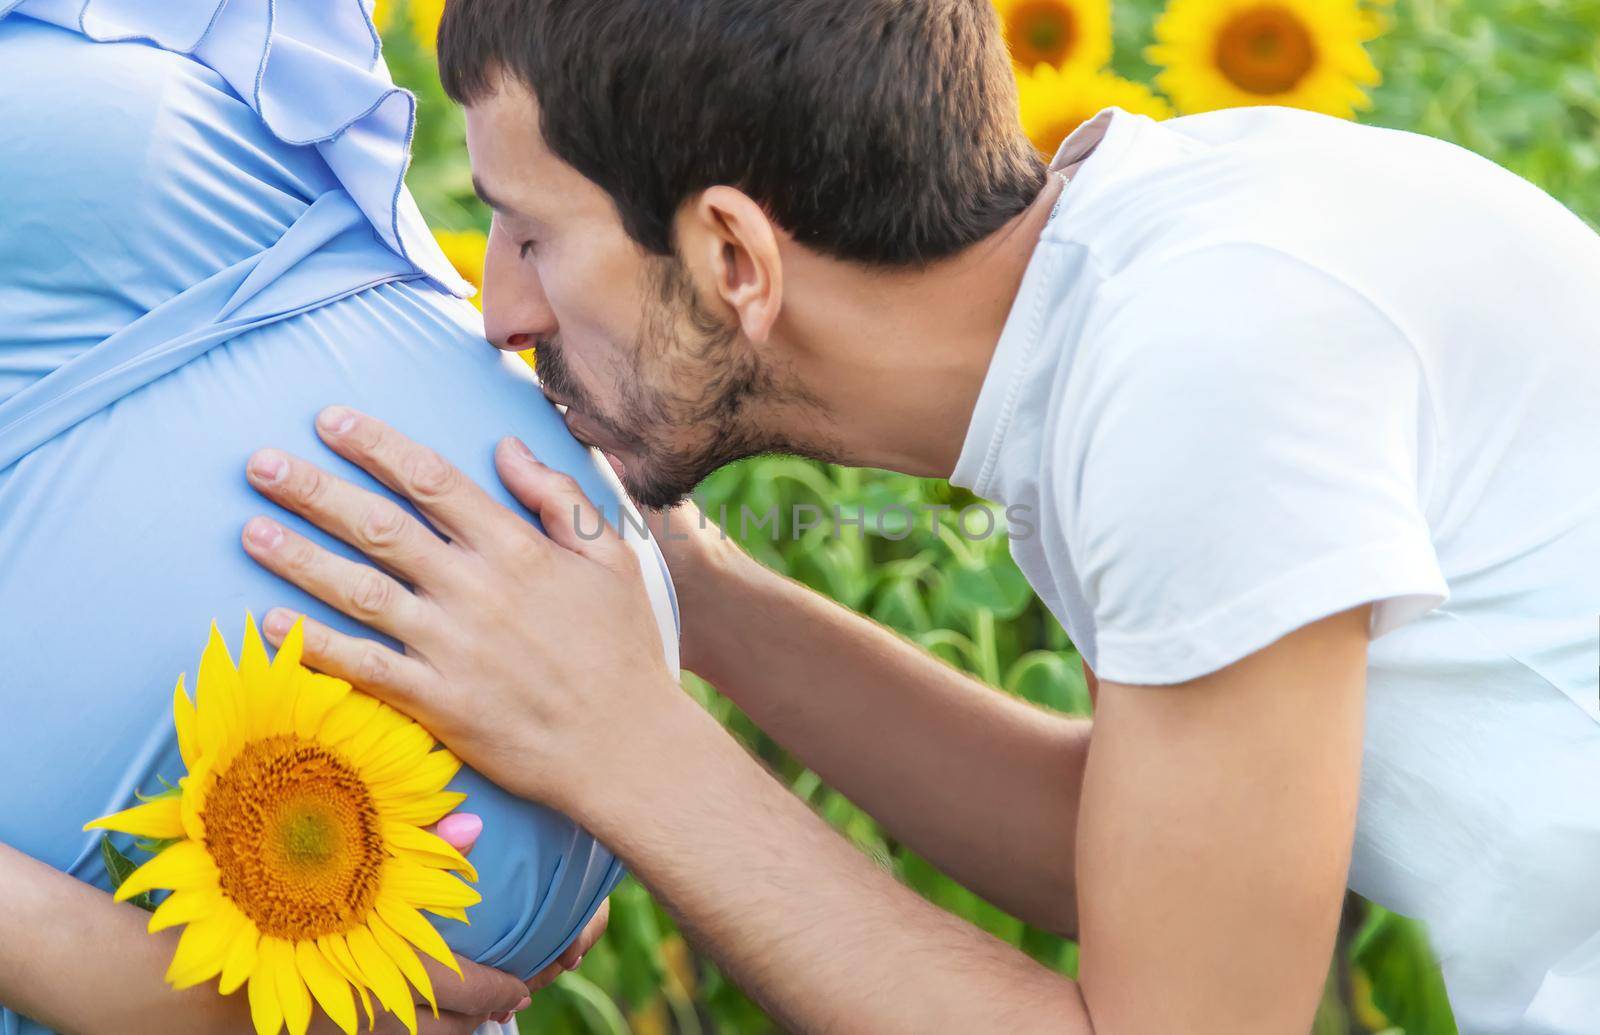 Pregnant woman and man in a field of sunflowers. Selective focus. nature.